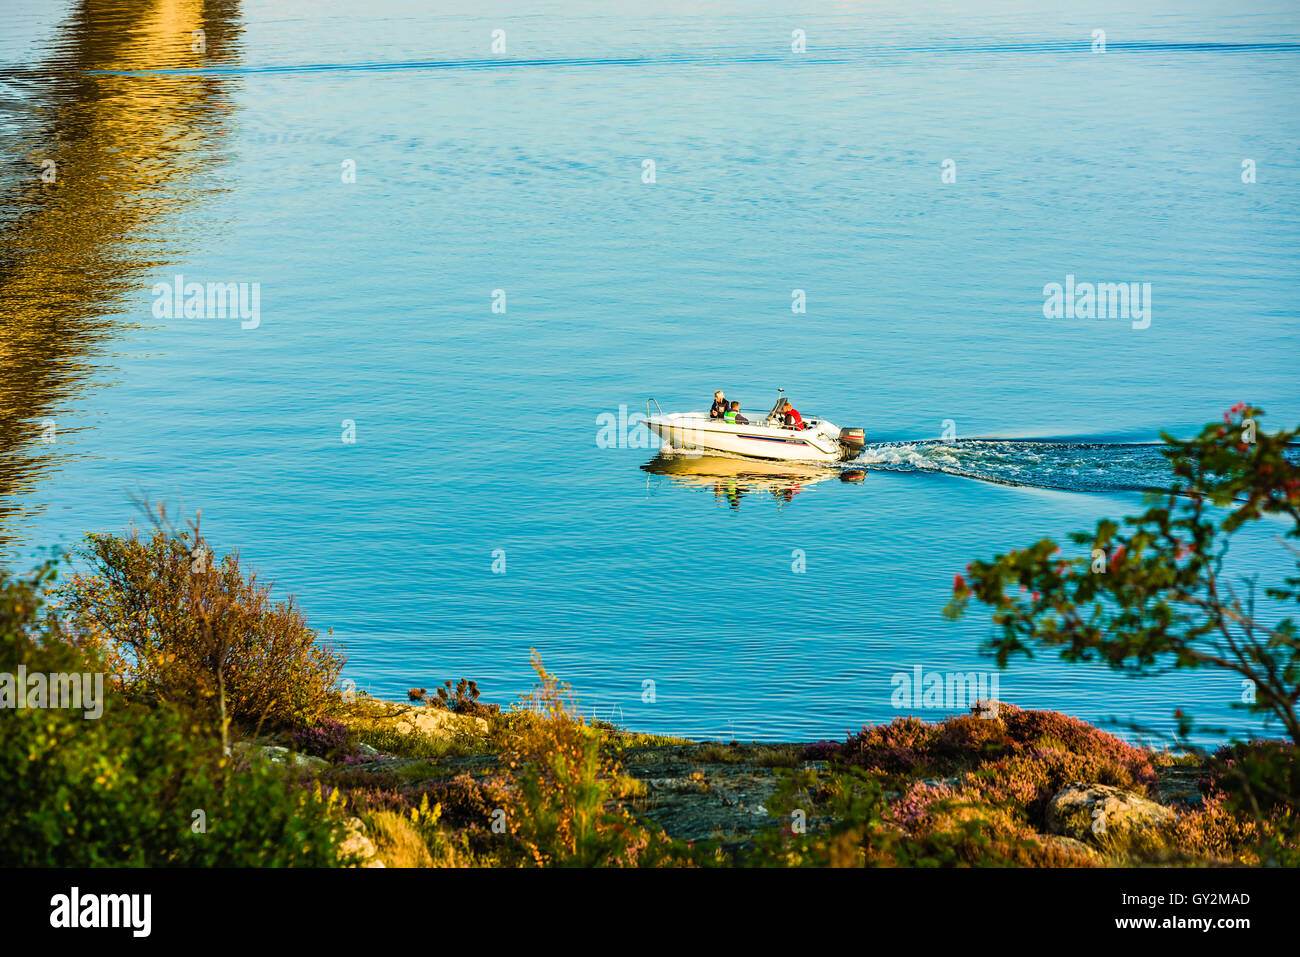 Marstrand, Sweden - September 8, 2016: Environmental documentary of three persons in a motorboat cruising close to land in motio Stock Photo